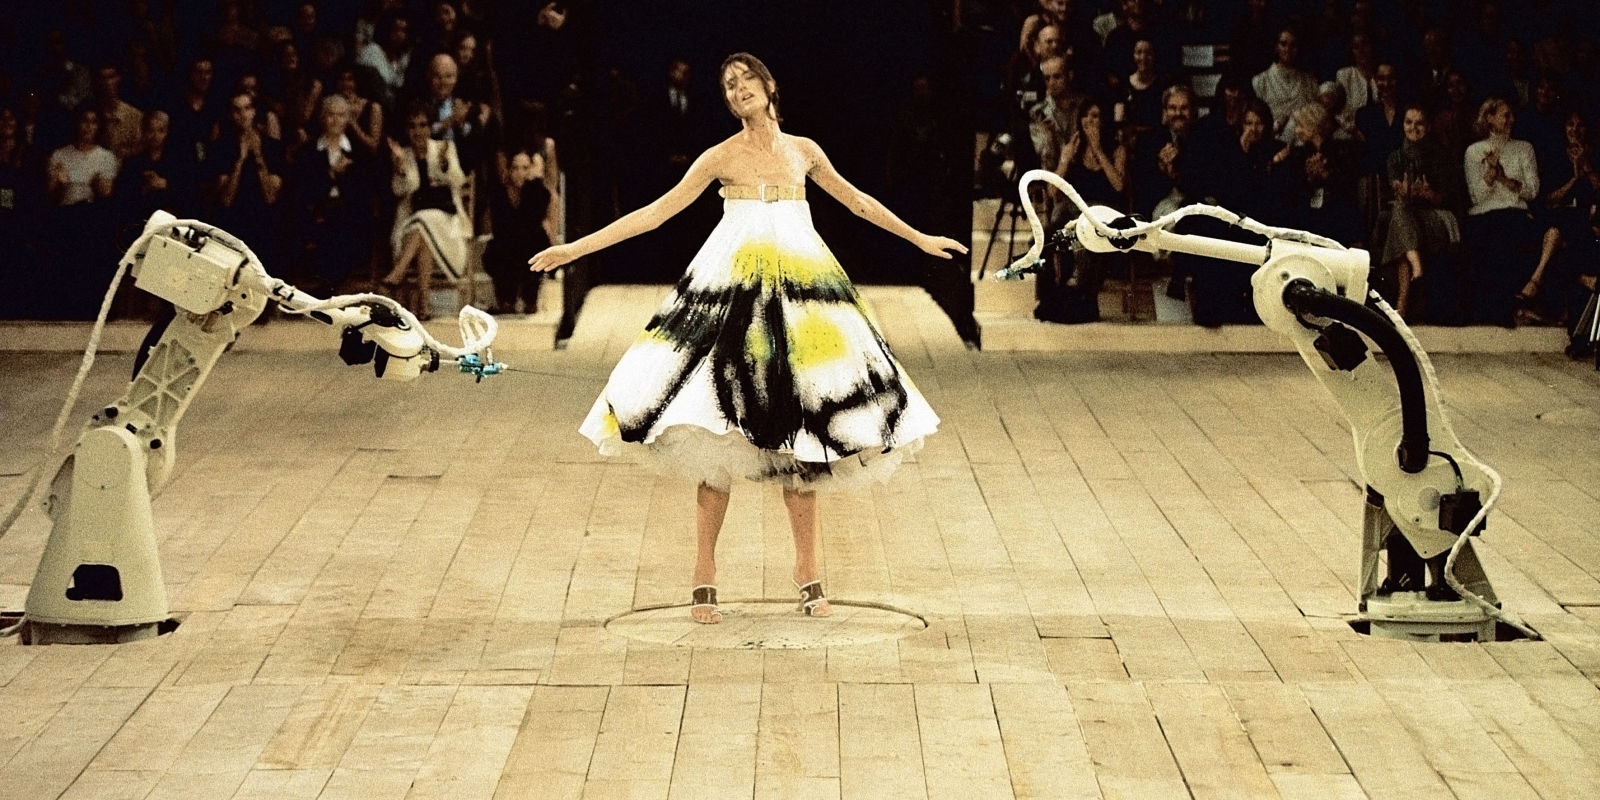 Shalom Harlow presenting the 'Spray painted dress' on the ever theatrical McQueen runway. Circa. S/S '99